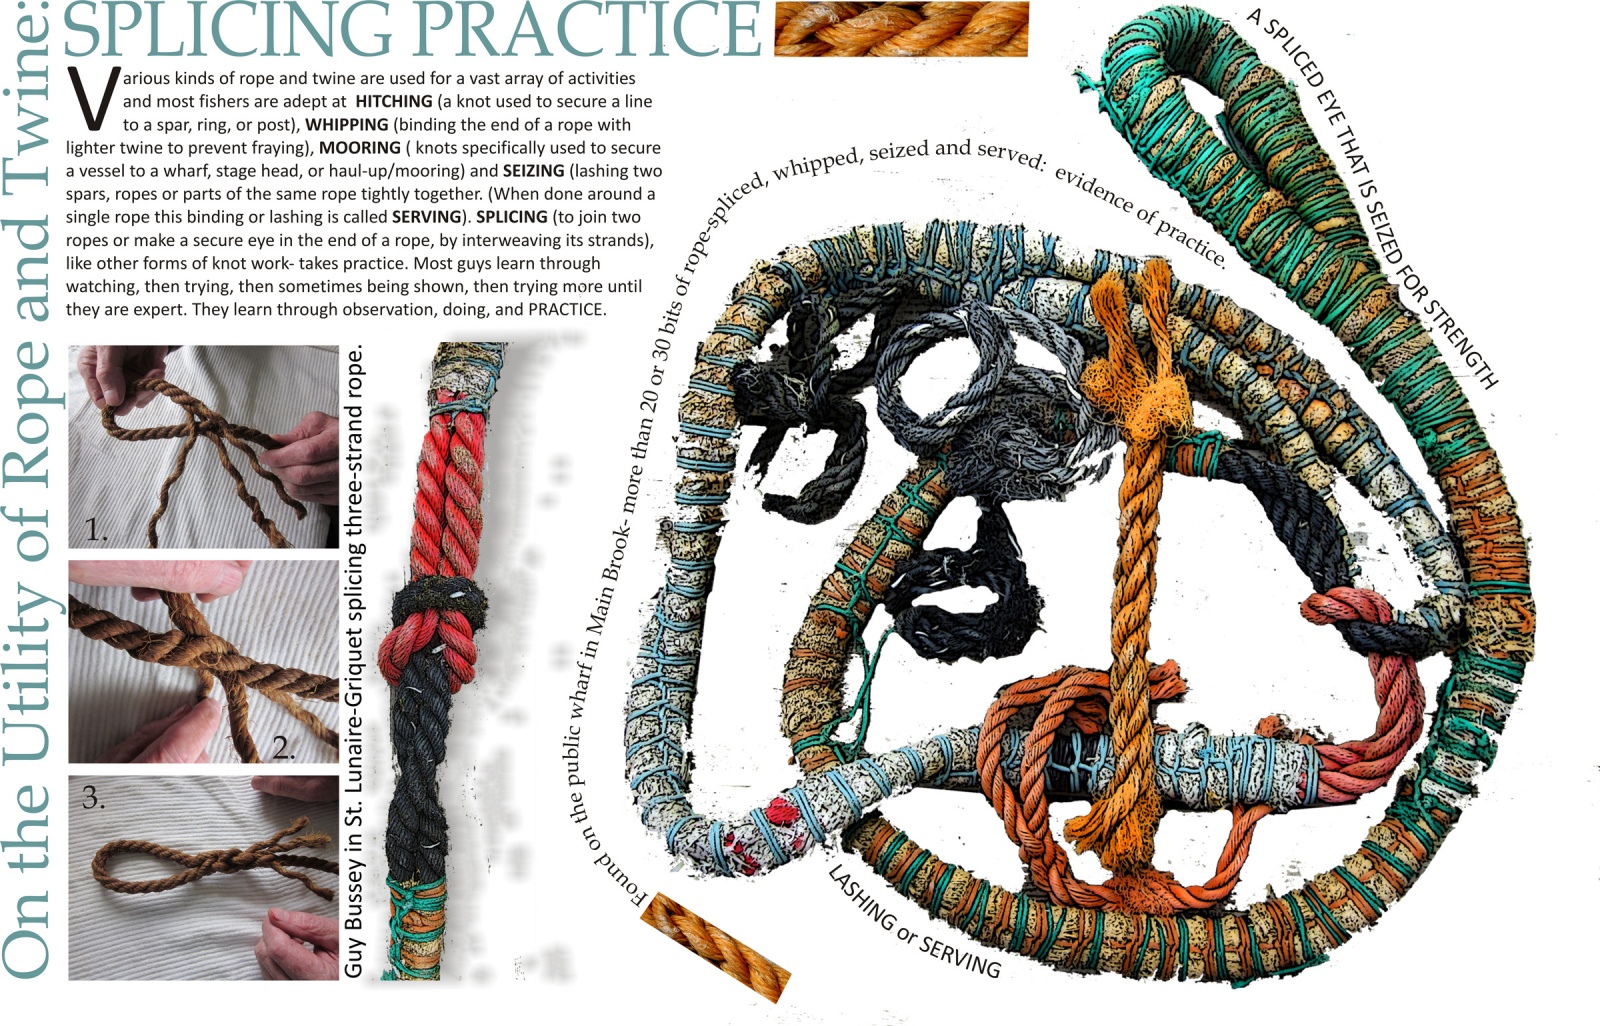 On the Utility of Rope and Twine: Splicing Practice